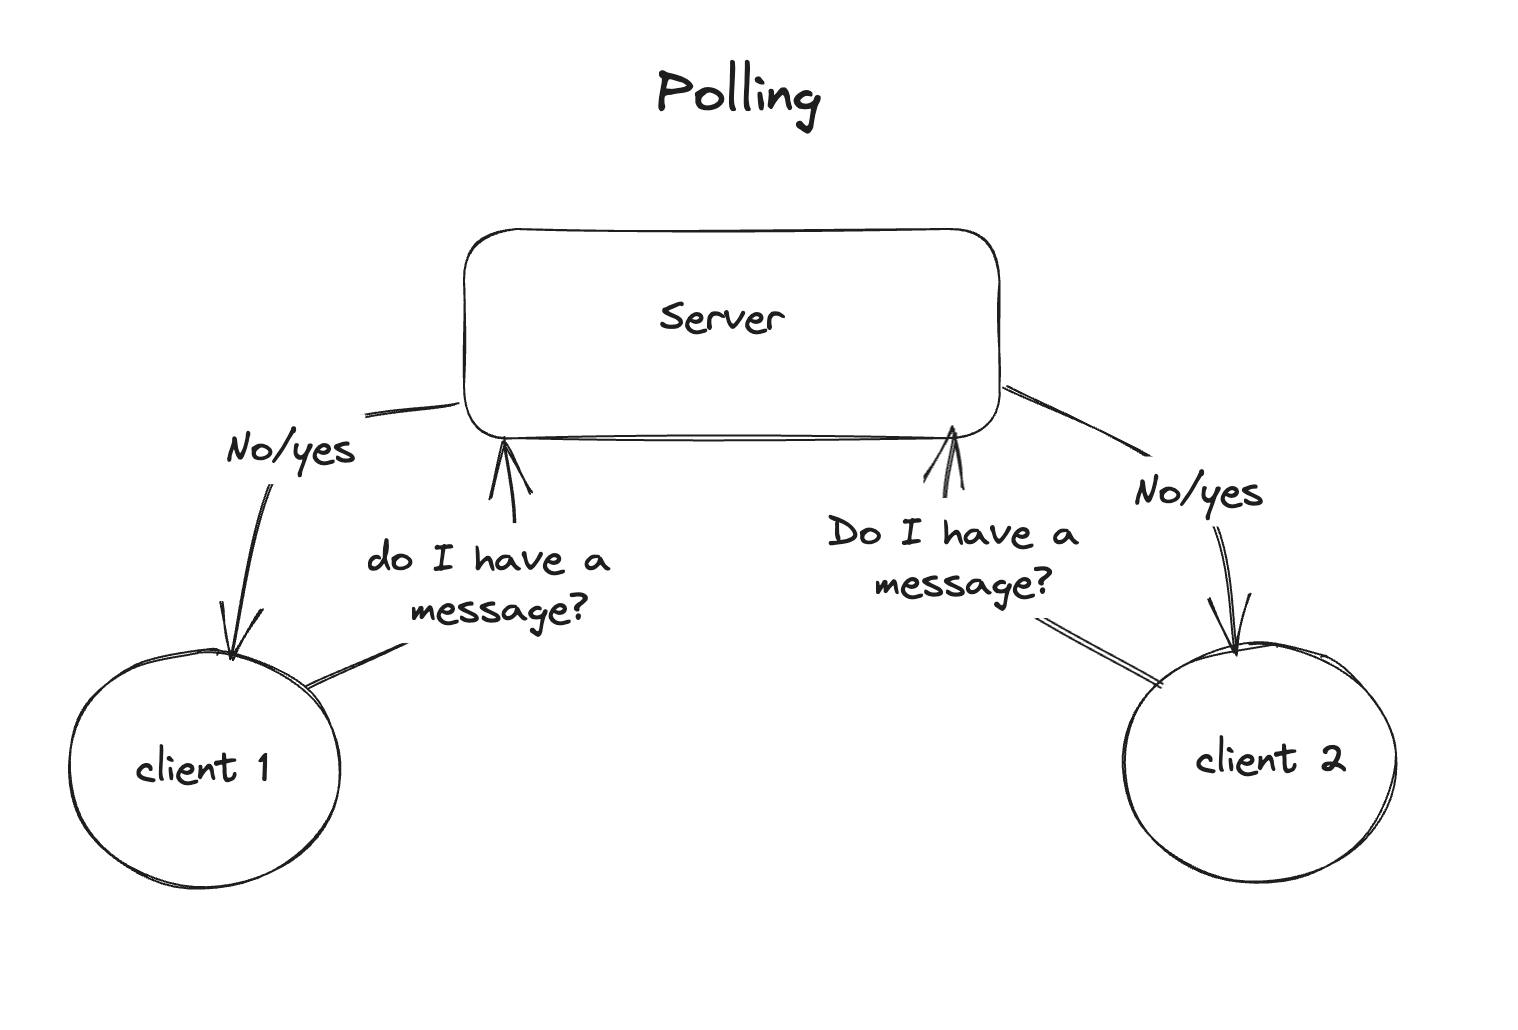 Polling explained